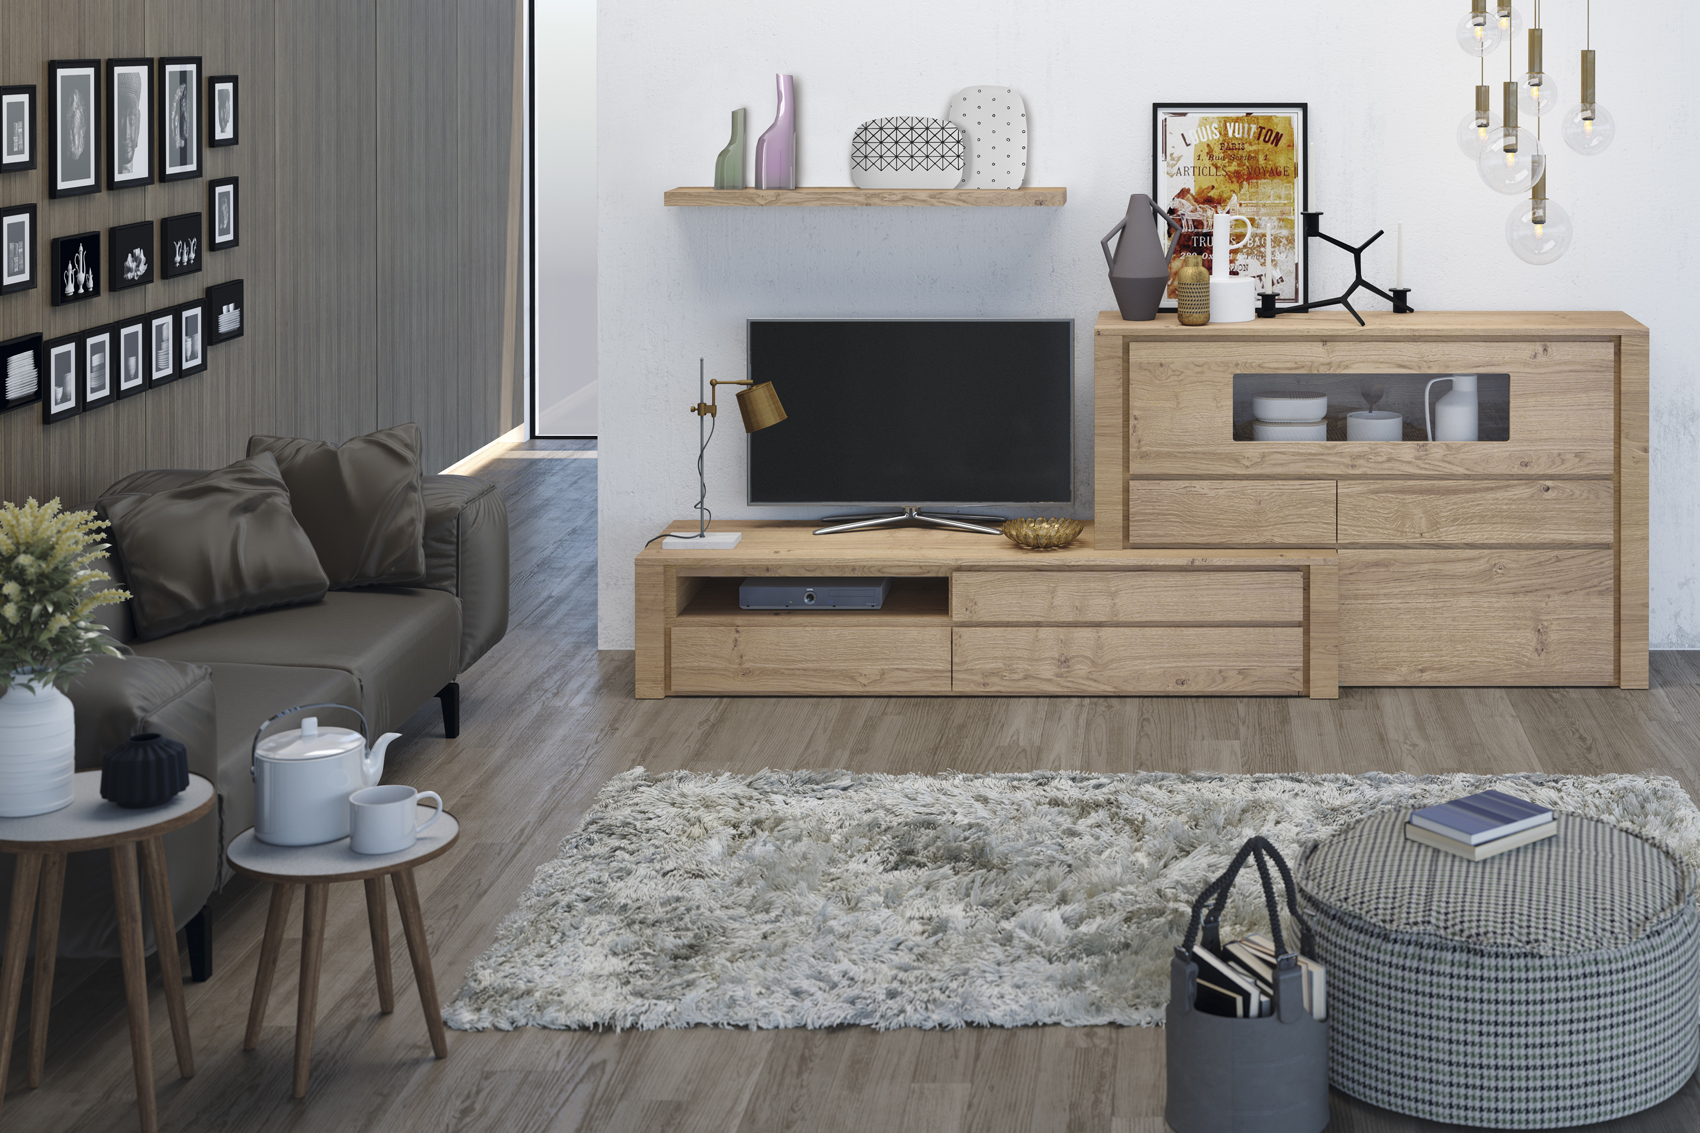 Brands MSC Modern Wall Unit, Italy Composition H7